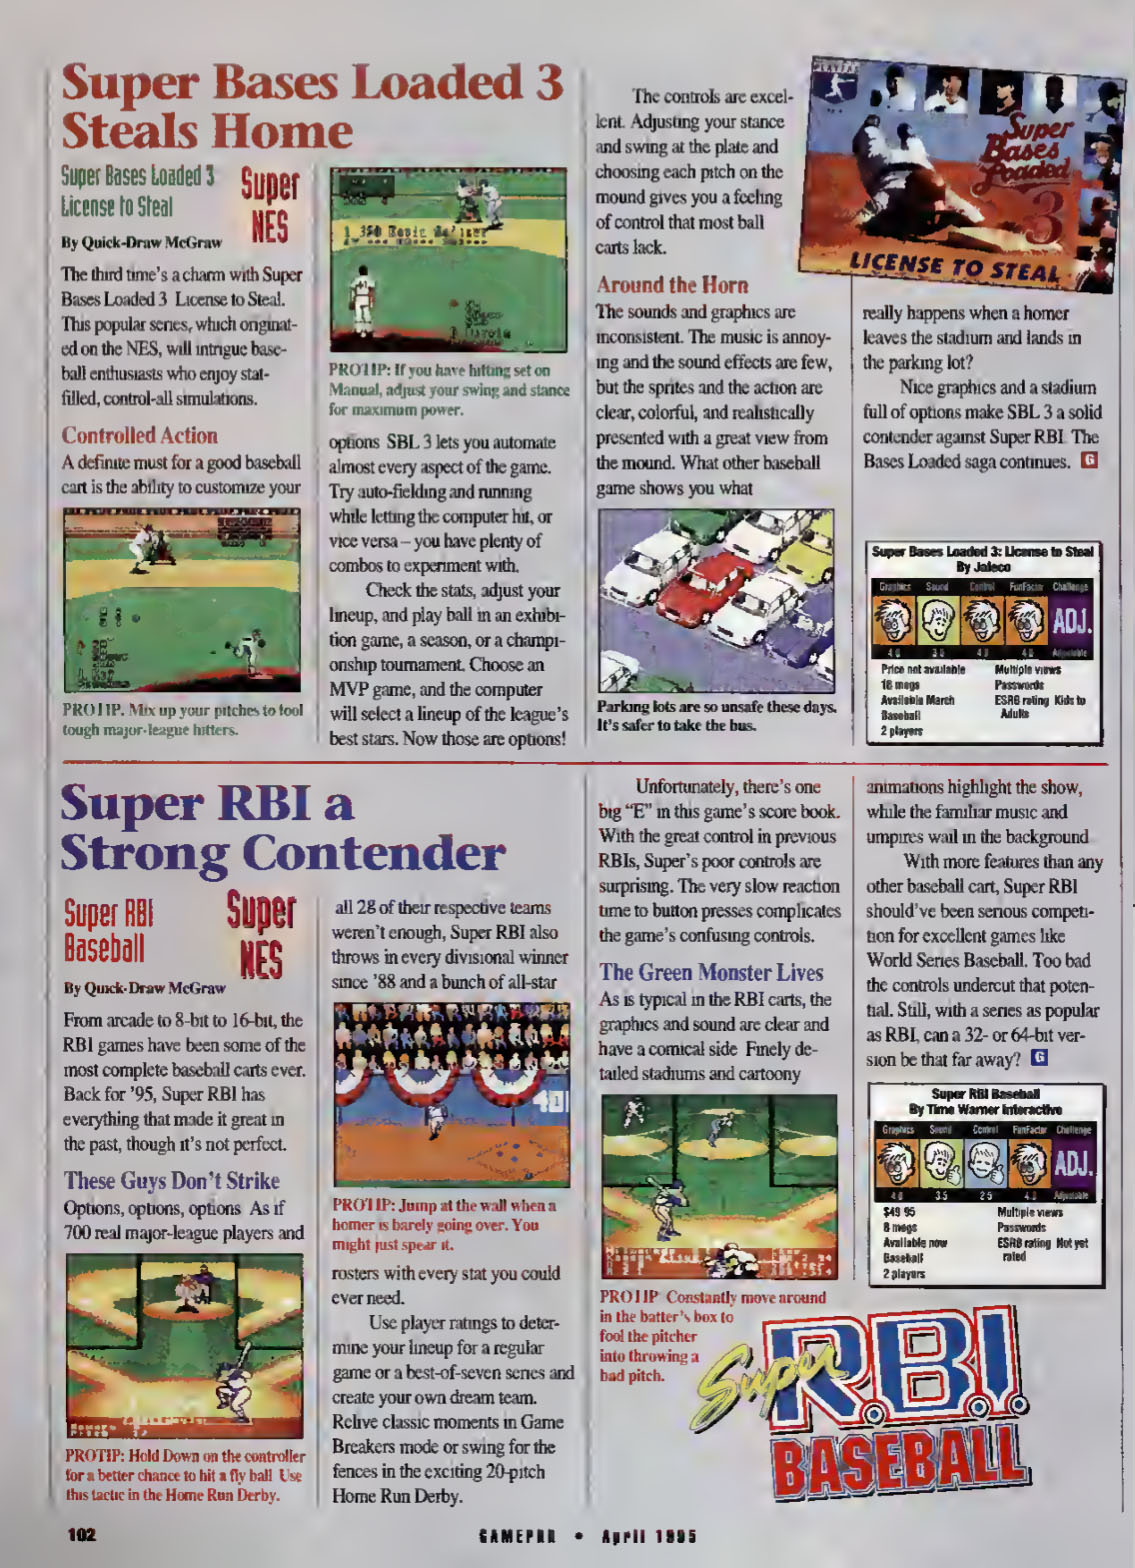 Super RBI a Strong Contender, GamePro April 1995 page 102